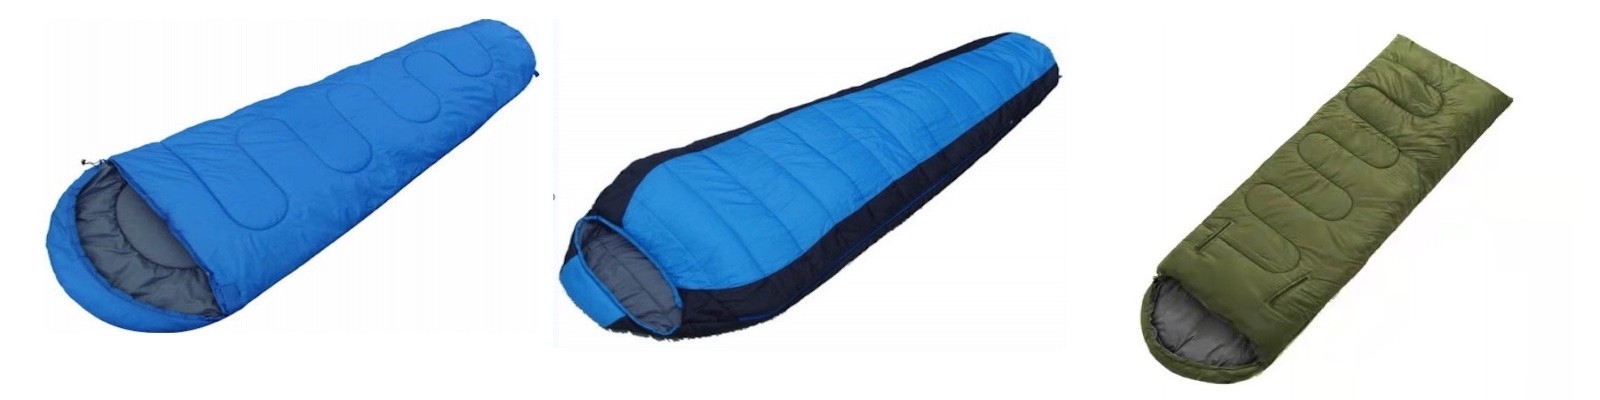 China best Mountain Sleeping Bags on sales